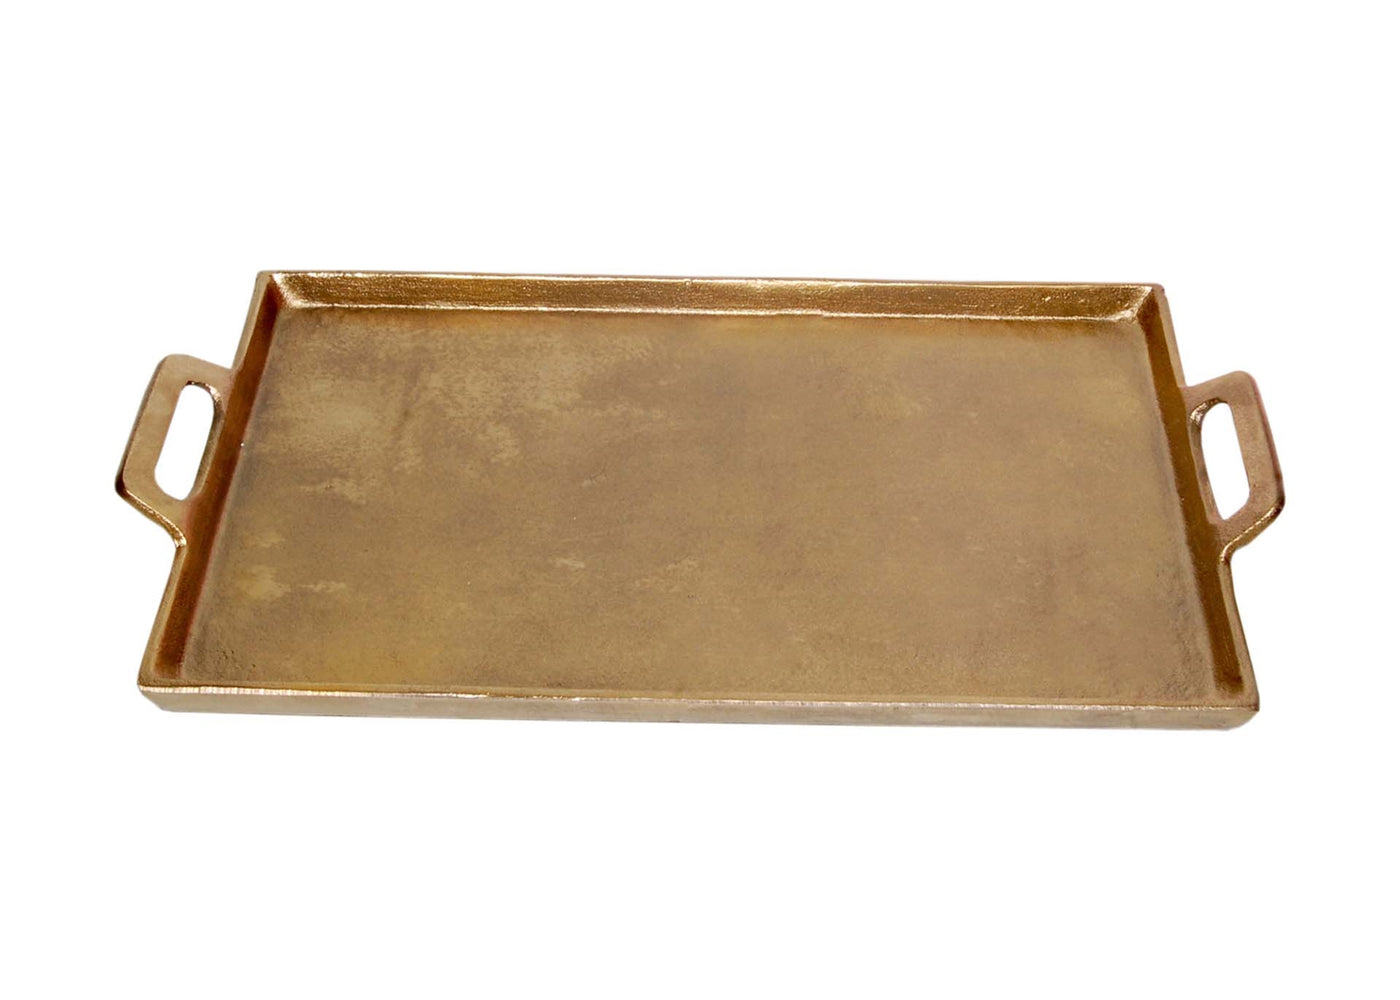 TRAY ALUMINUM WITH HANDLES ANTIQUE BRASS (Available in 4 Sizes)